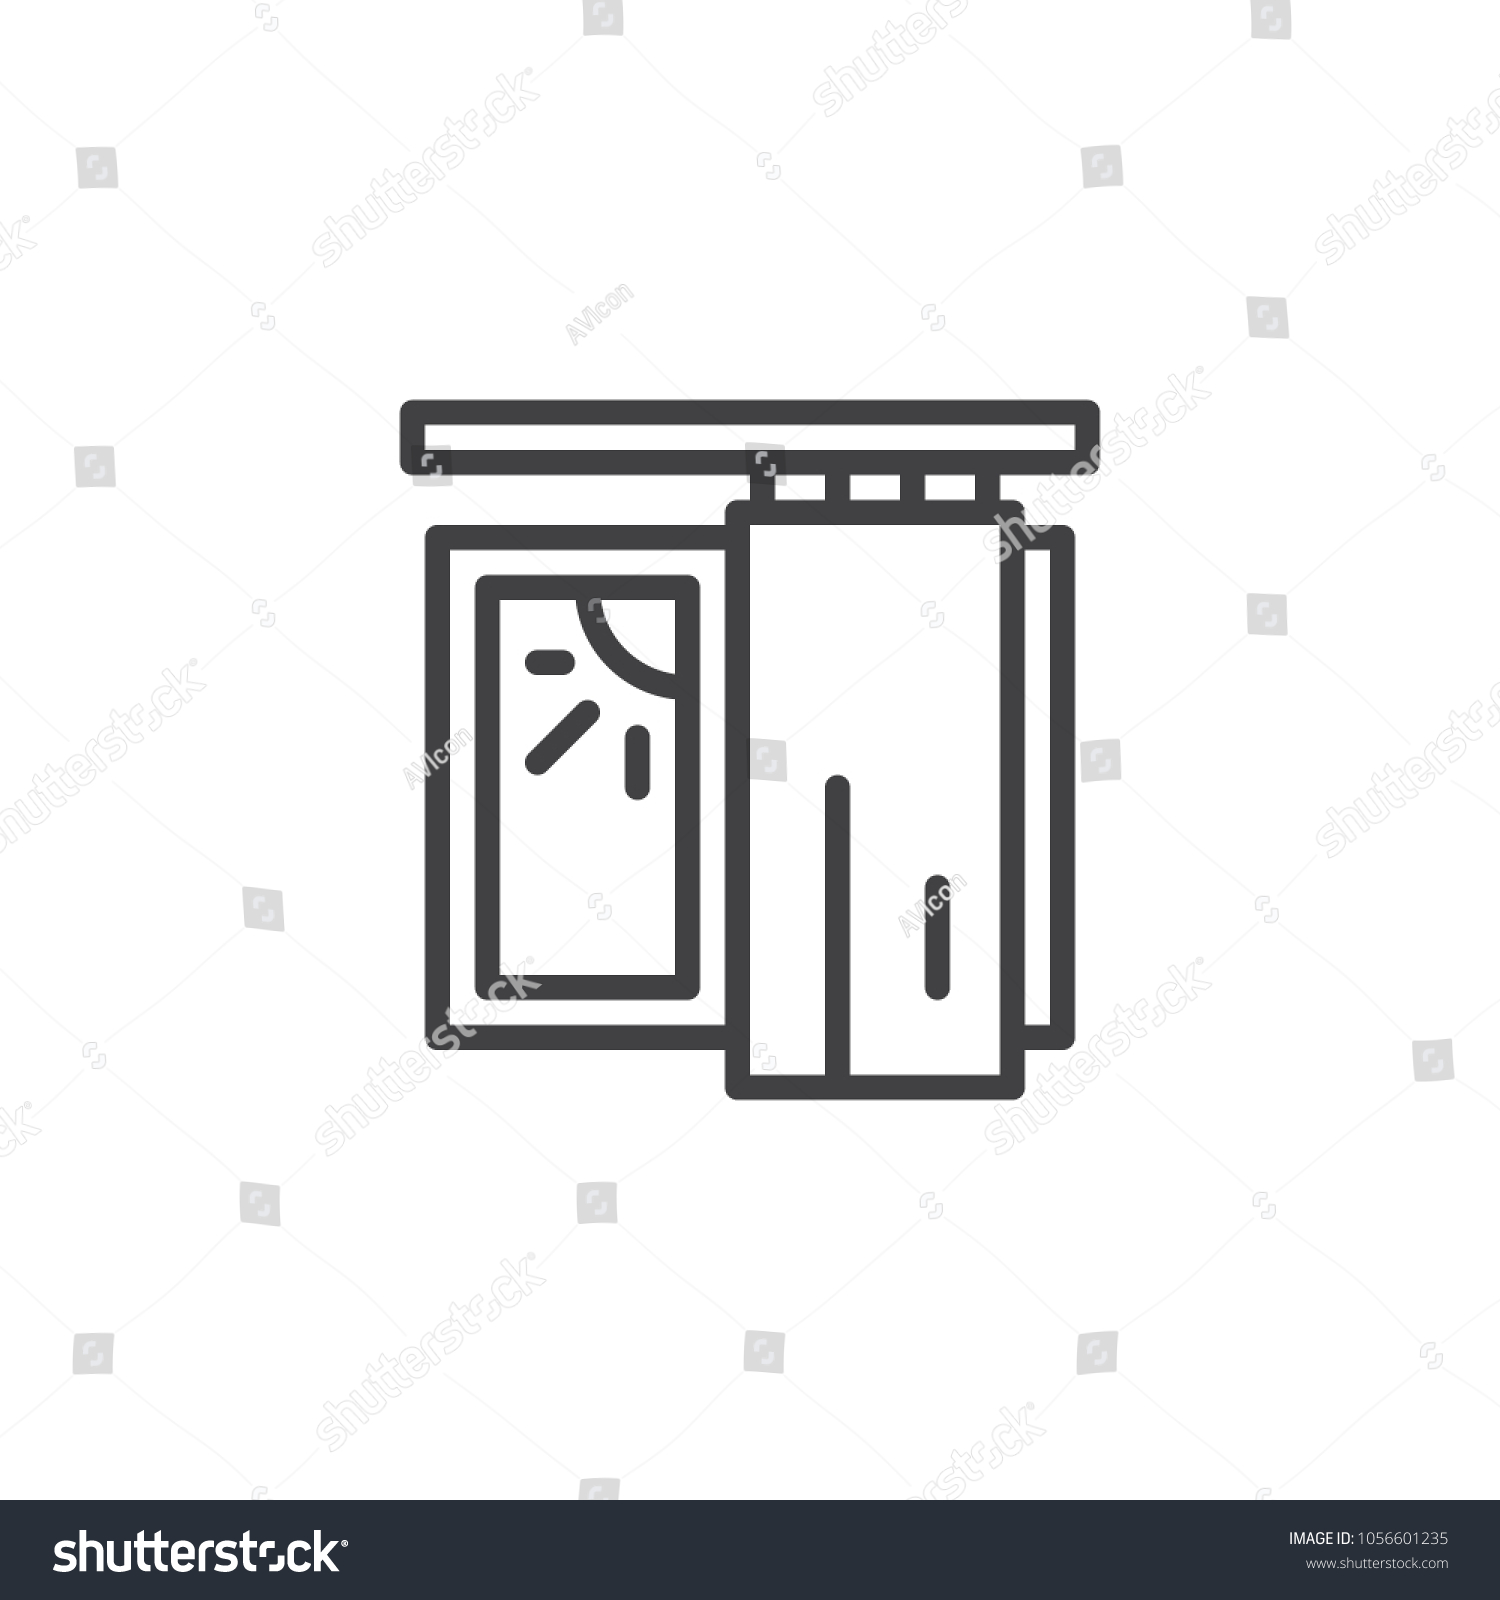 Curtain Window Morning Sunrise Outline Icon Stock Vector 1056601235